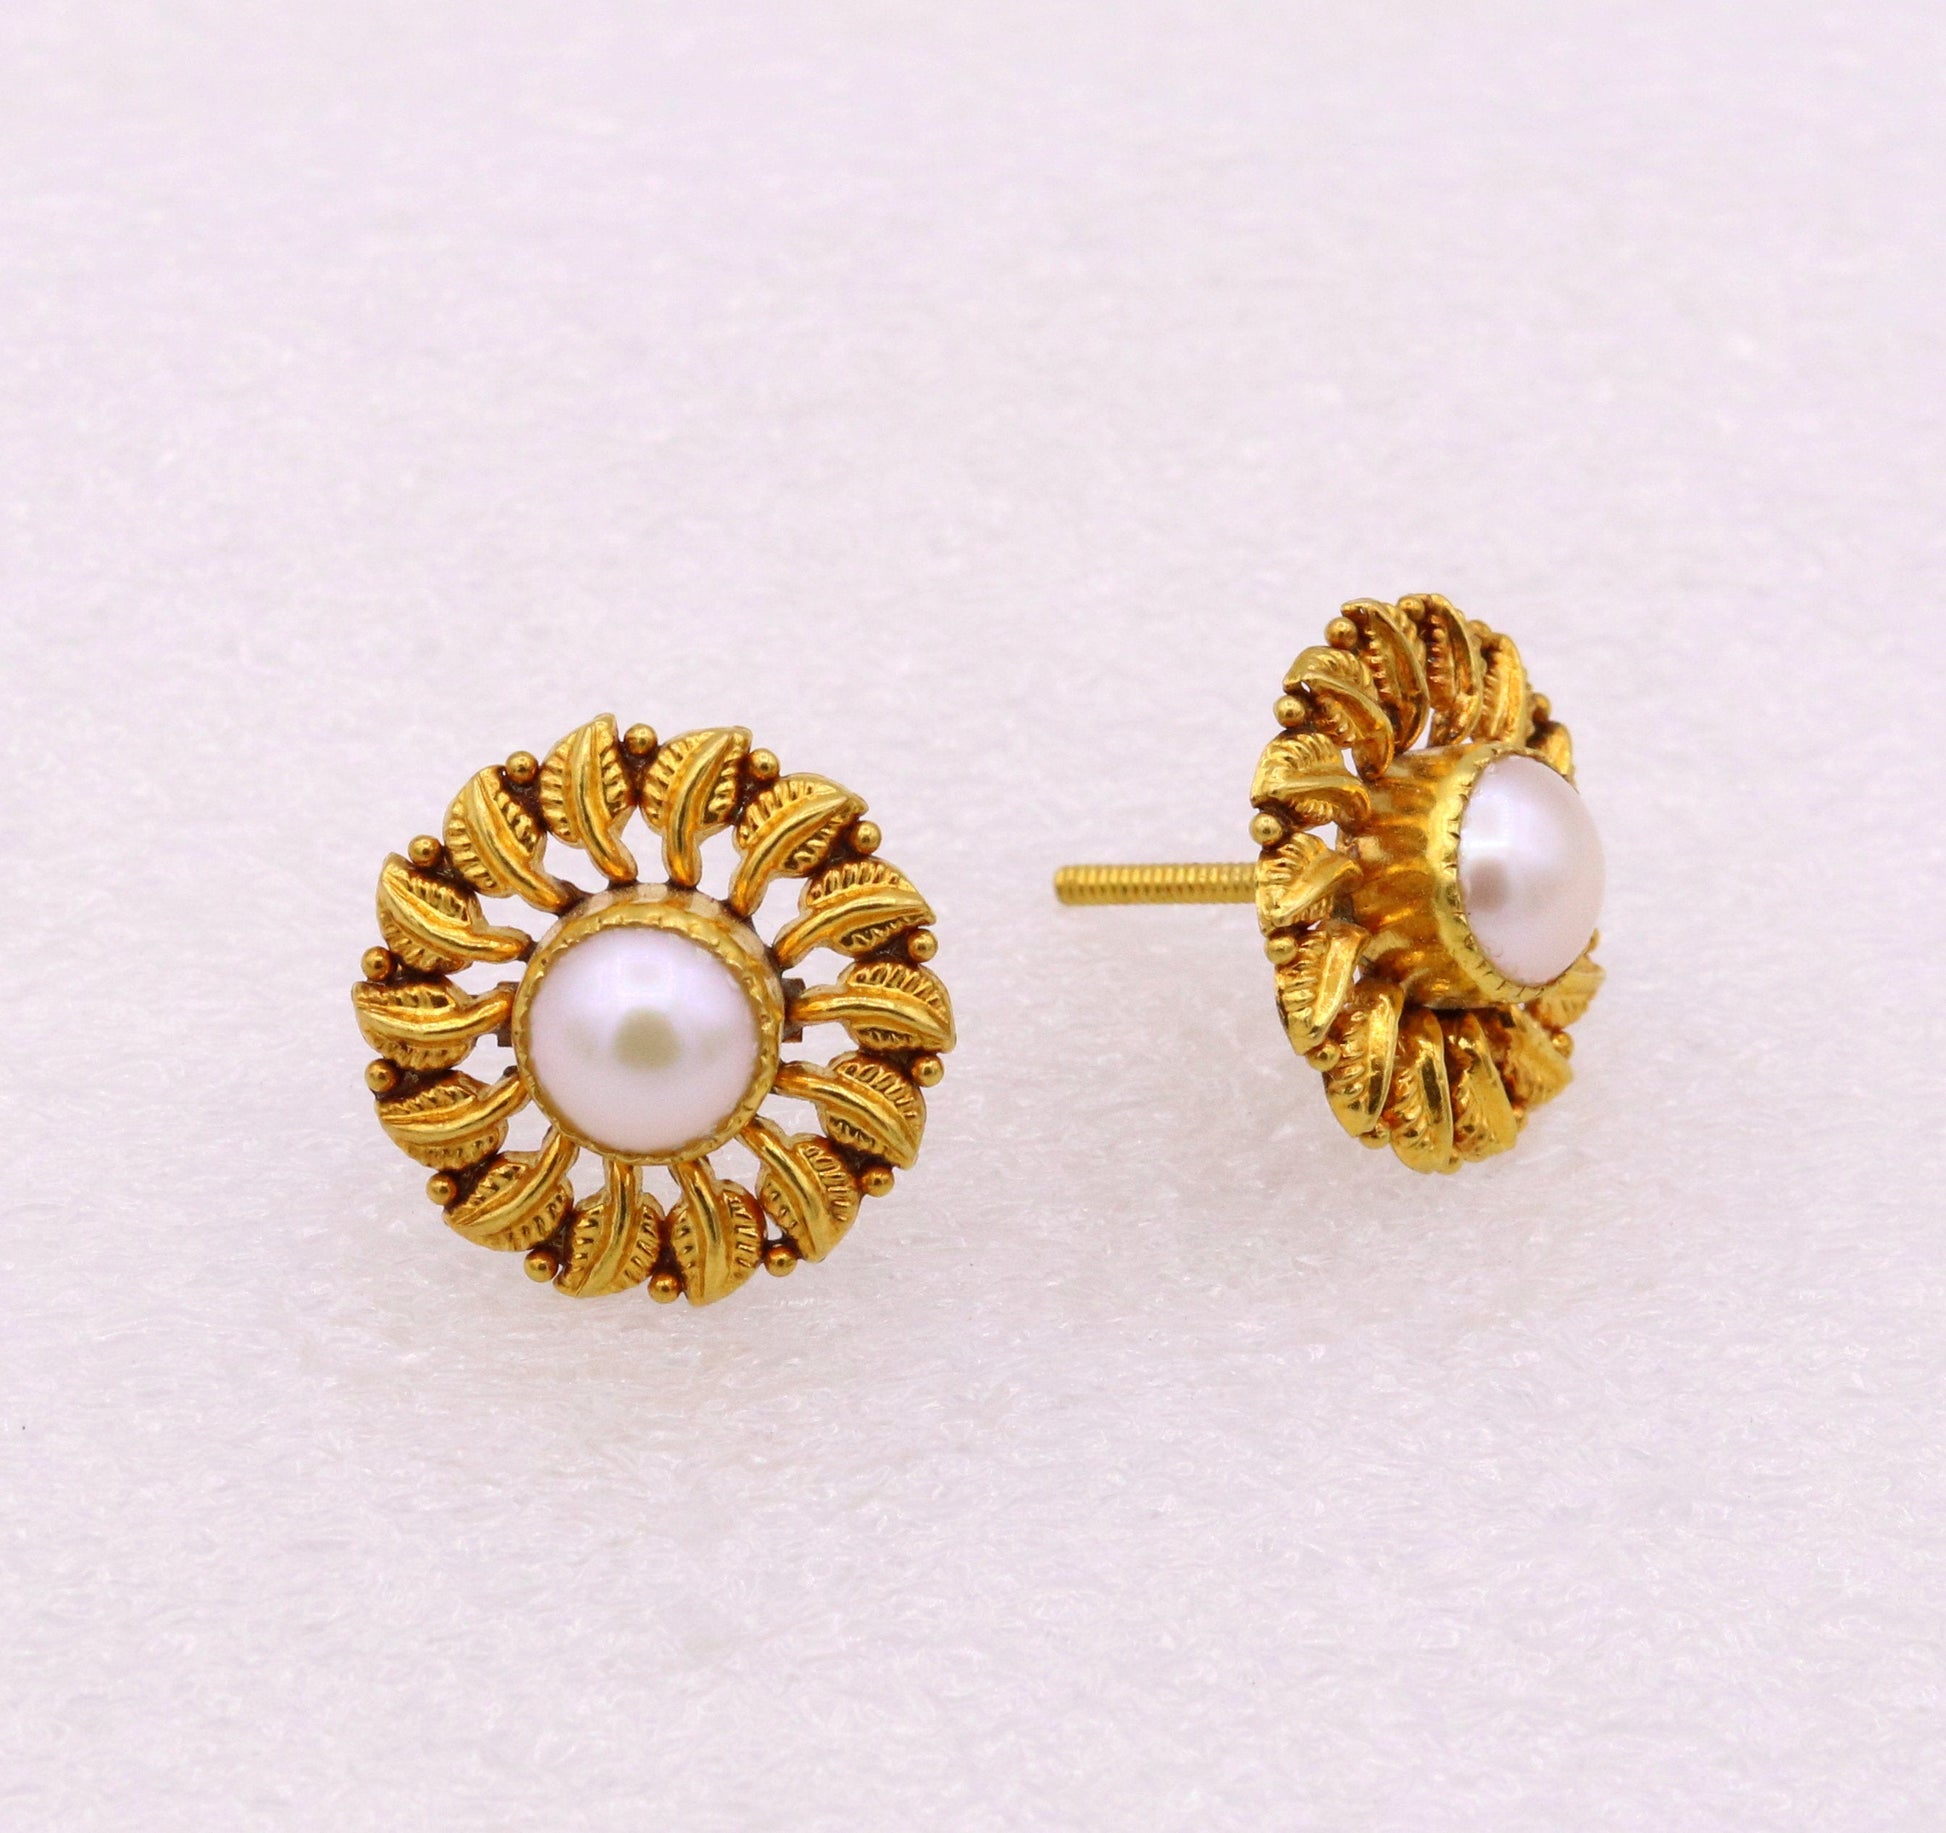 Vintage antique design certified 22kt yellow gold flower shape leaf design handmade stud earring gorgeous tribal jewelry india - TRIBAL ORNAMENTS